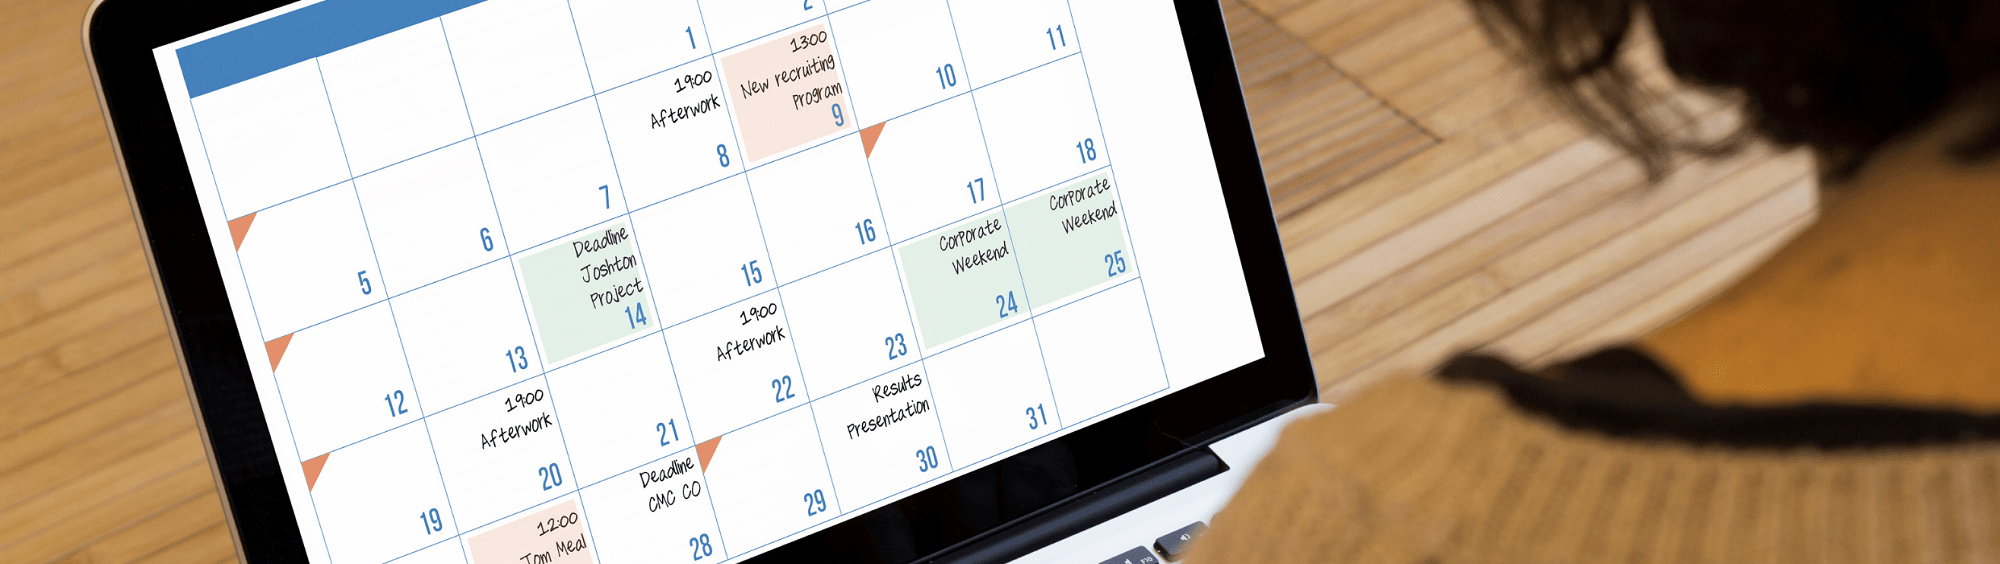 Codus IT - Microsoft Time Management - Personal and Work Calendar